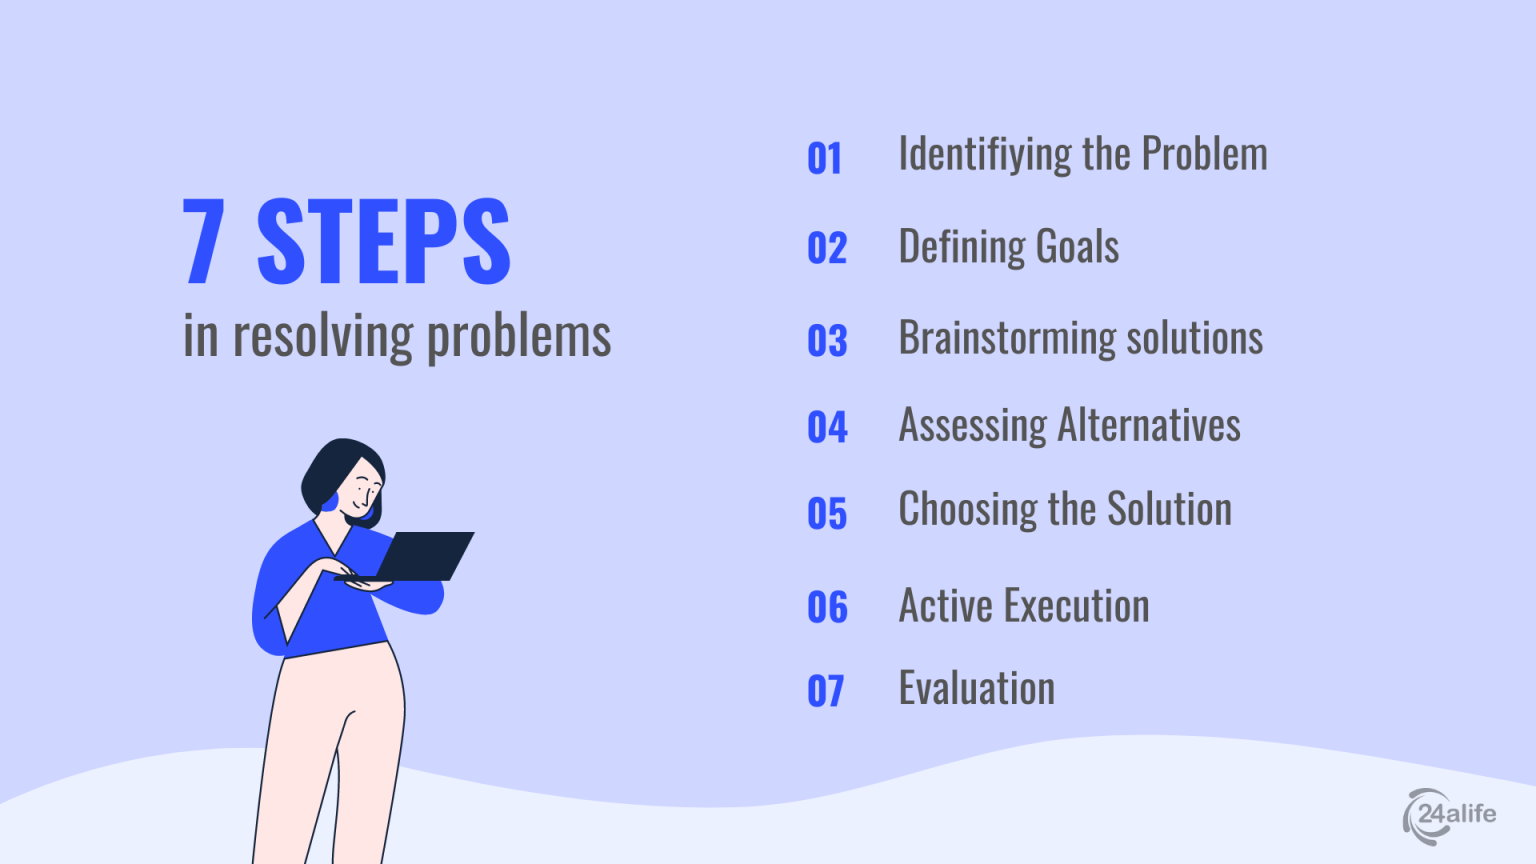 what problem solving step comes third